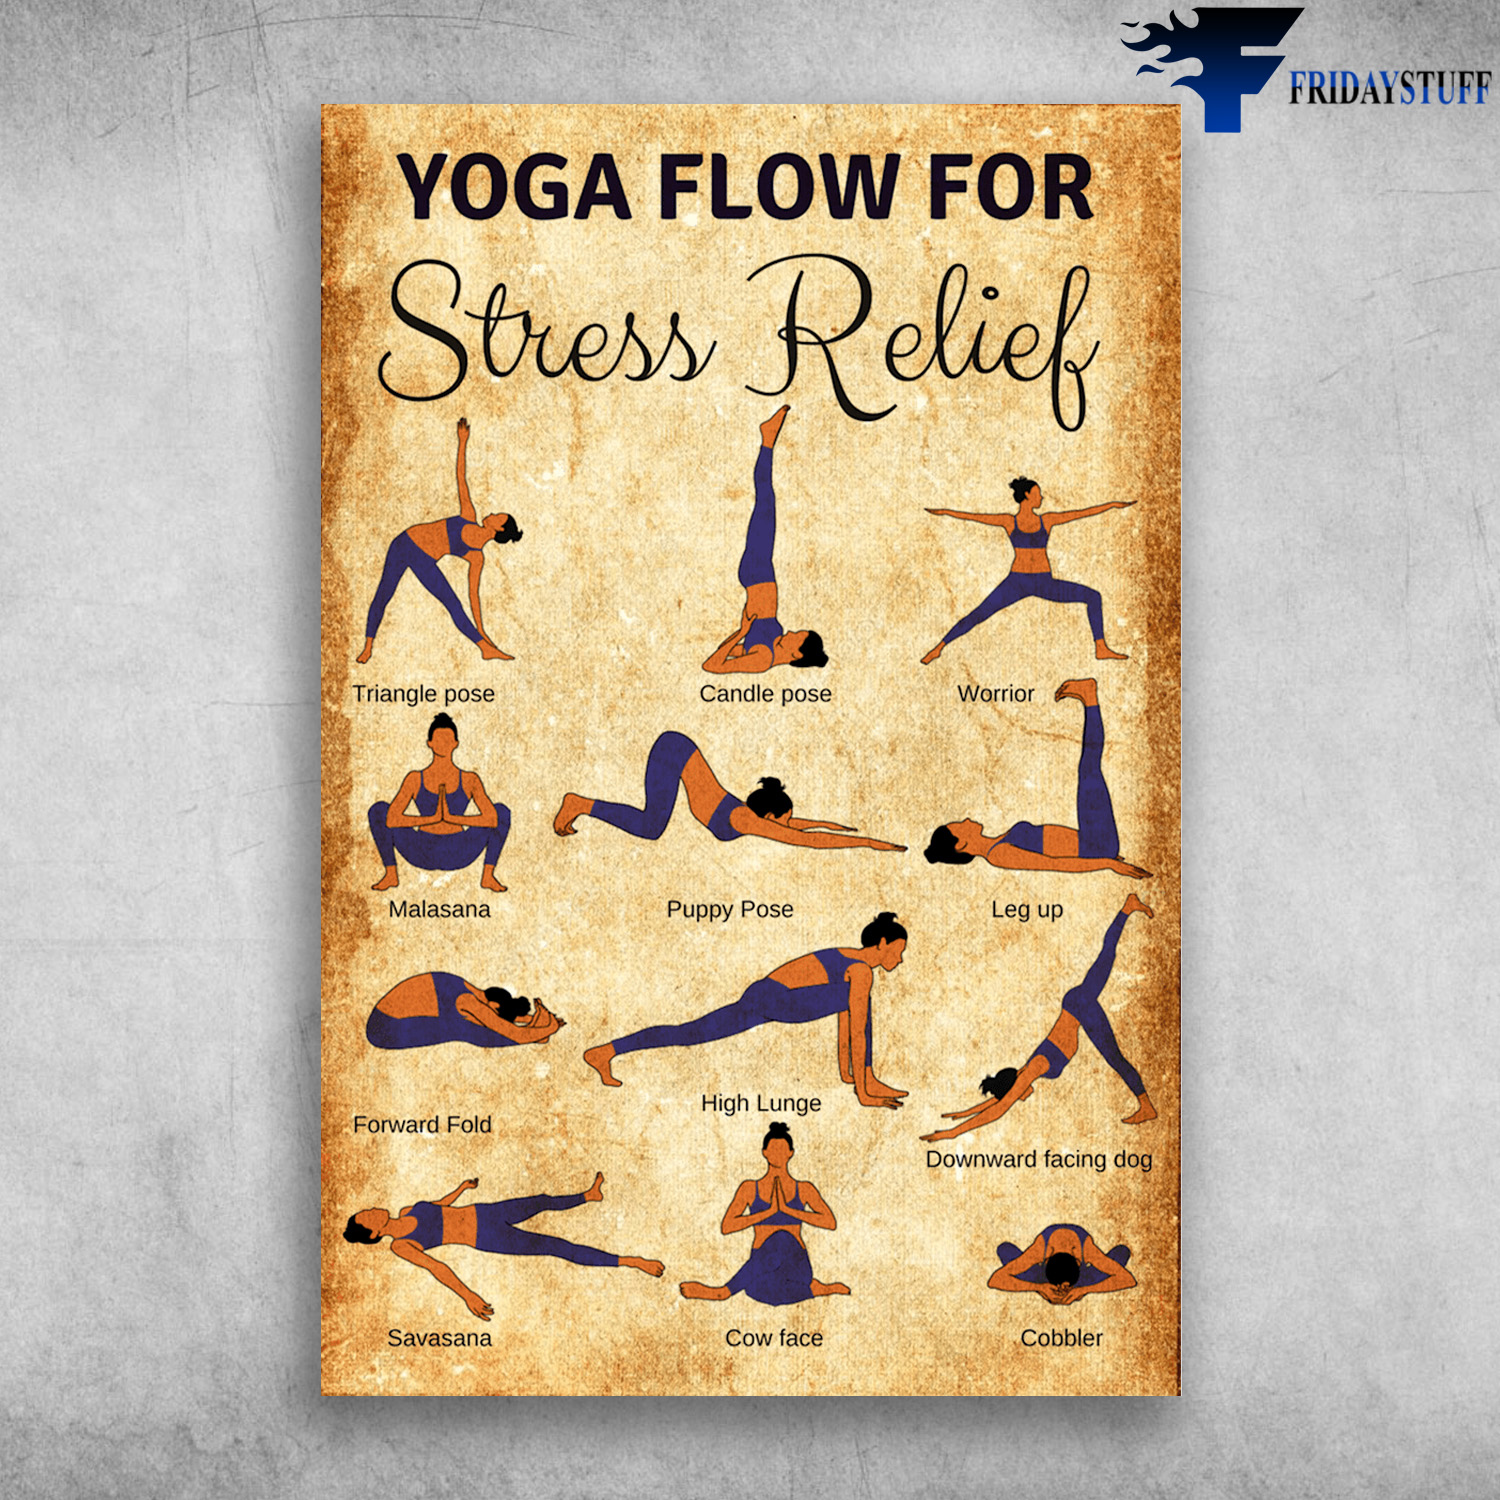 Yoga Lover - Yoga Poses - Yoga Flow For Stress Relief Poster Wall Decor Art  Print